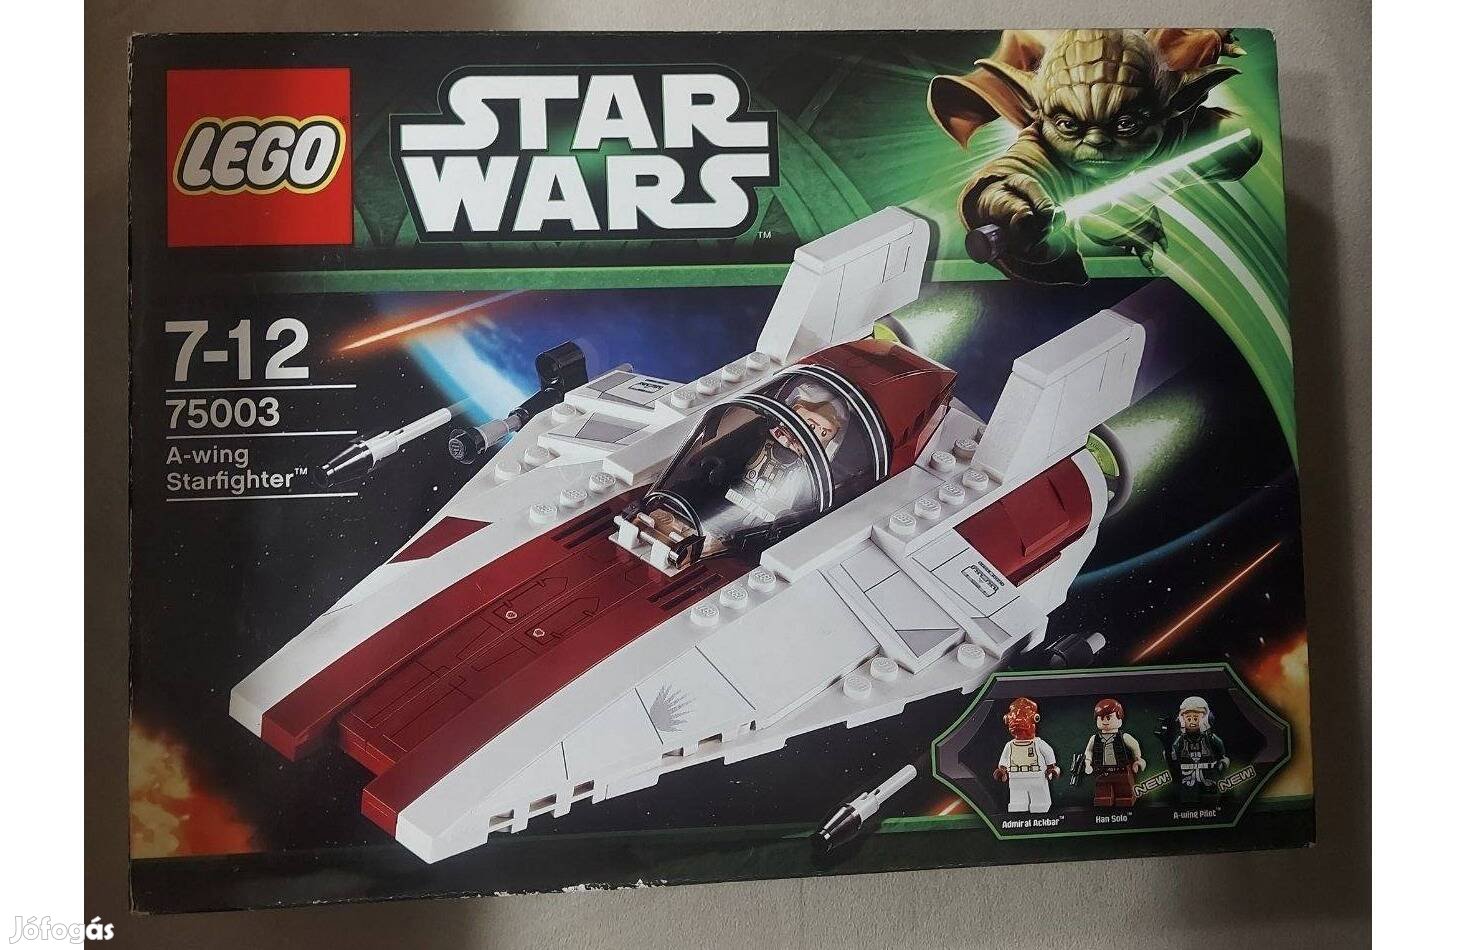 LEGO Star Wars 75003 - A-wing Starfighter